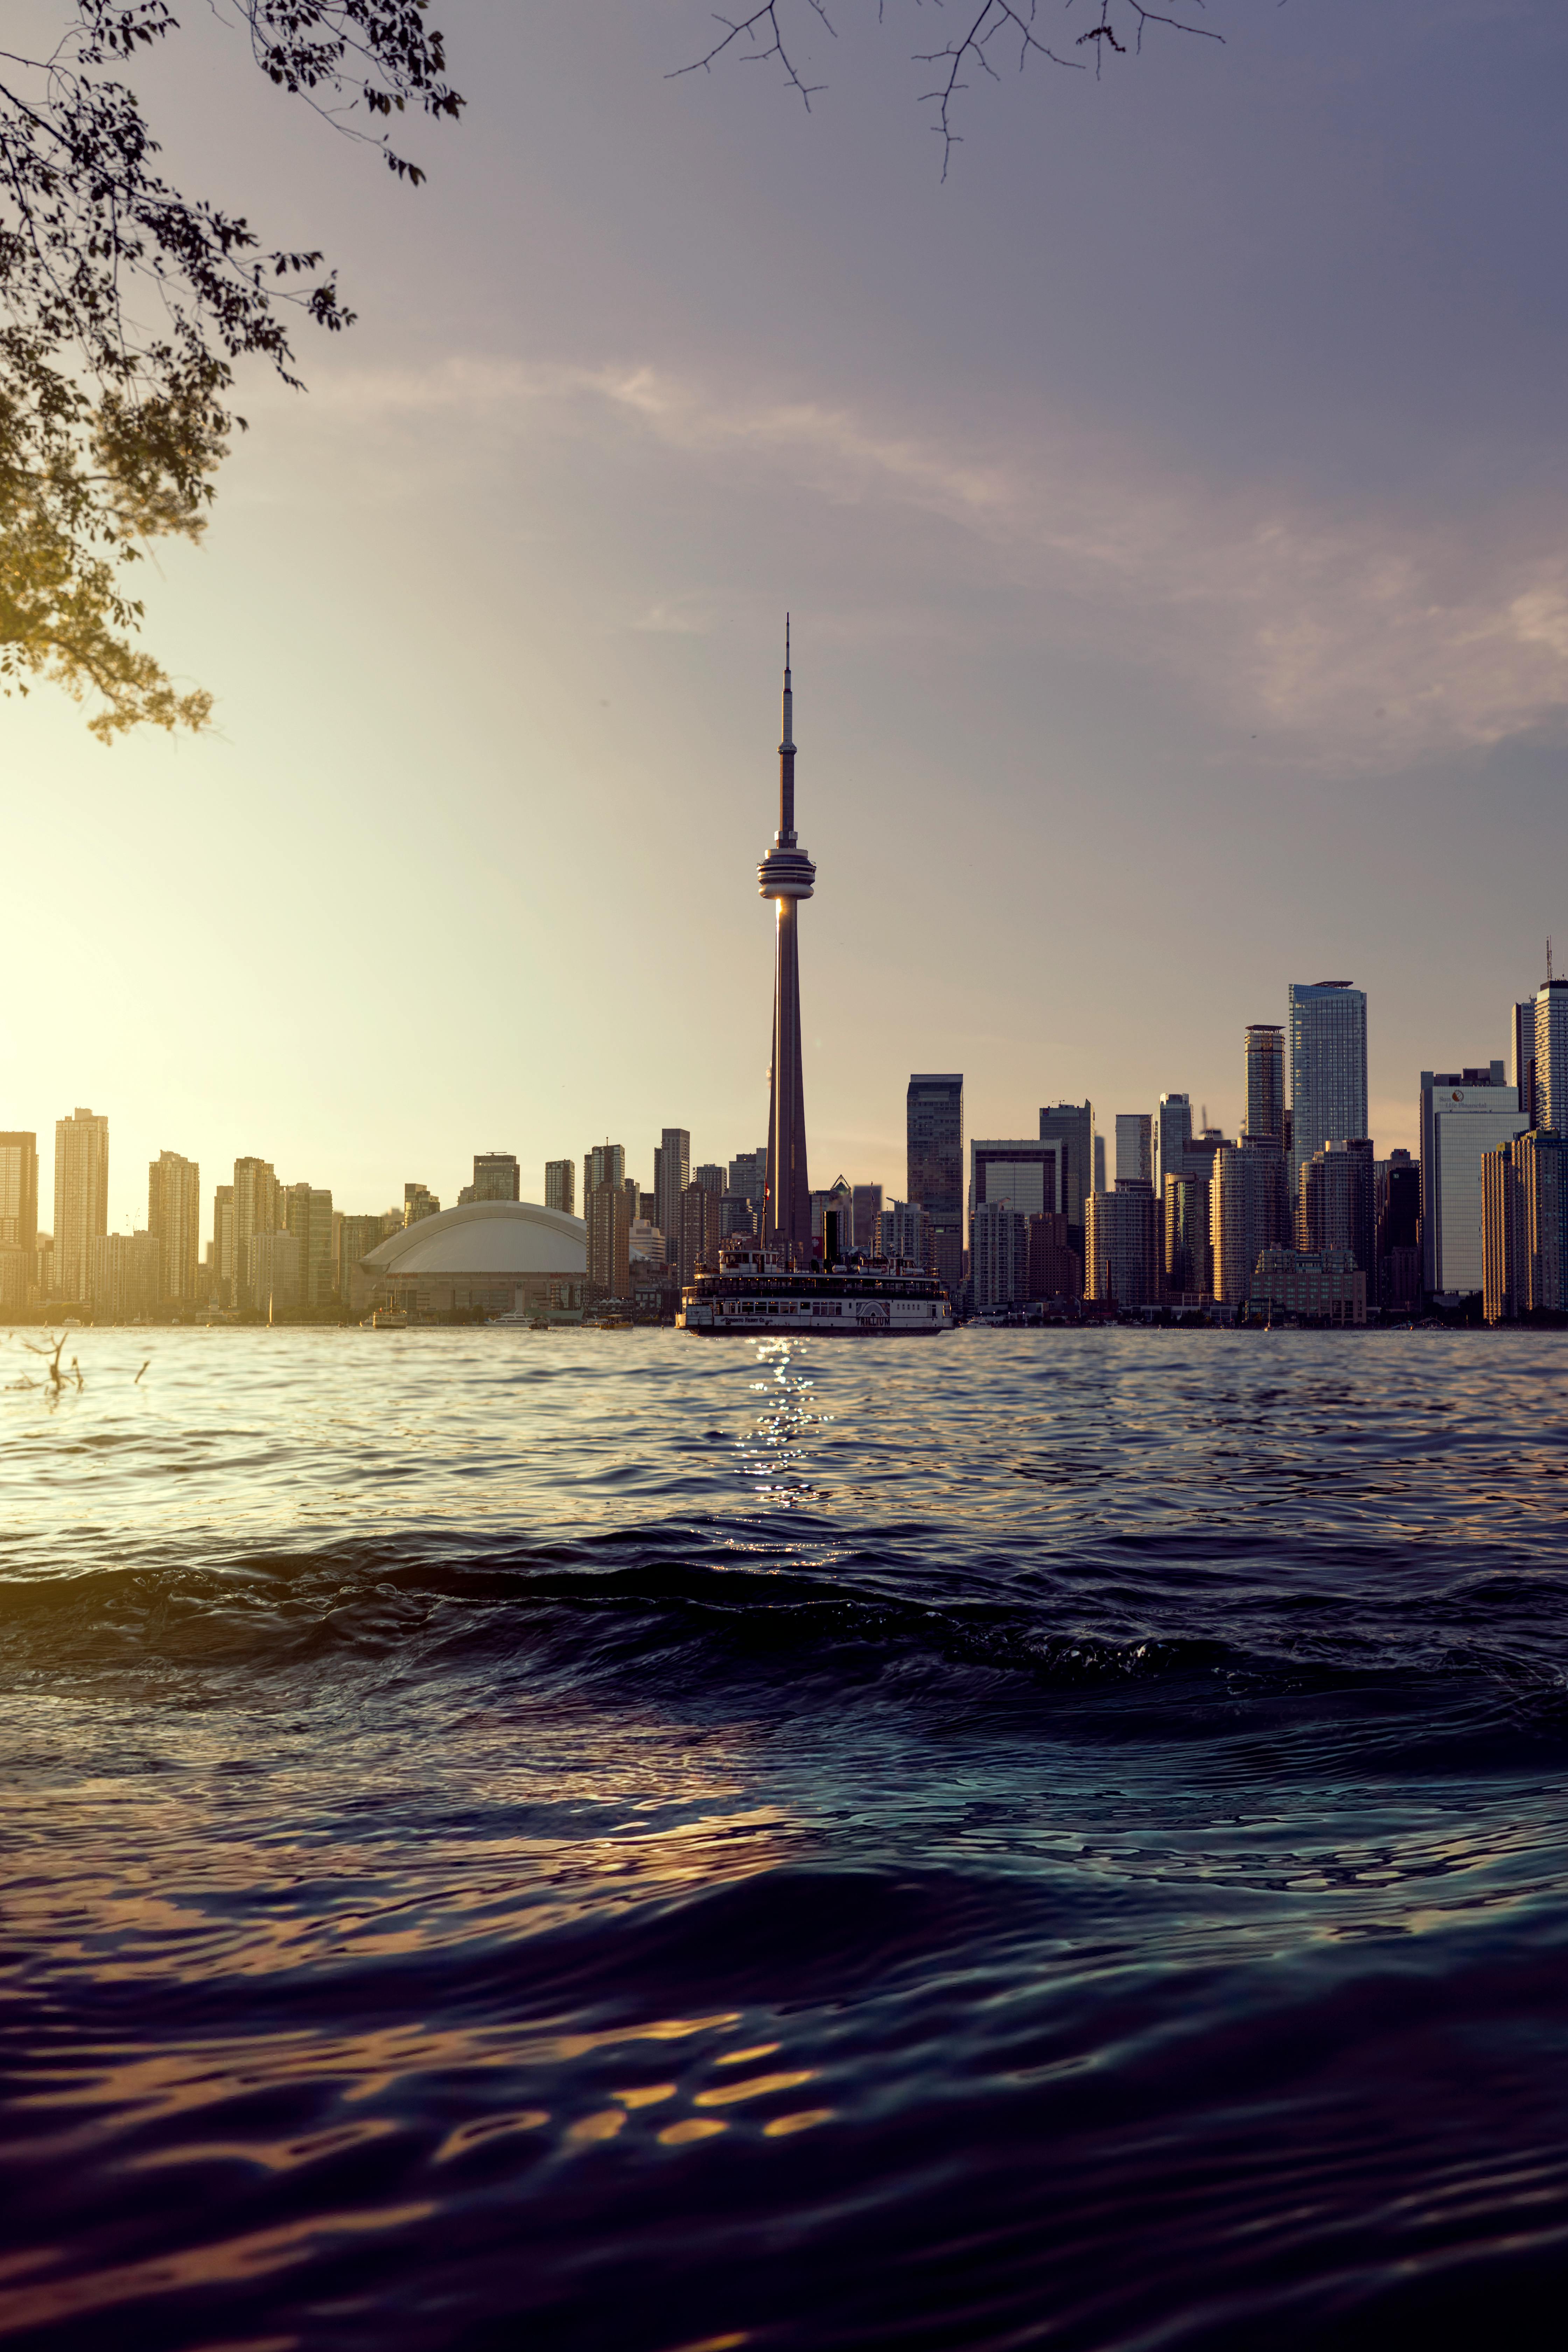 Toronto Pictures: Free Photos of Downtown & the CN Tower